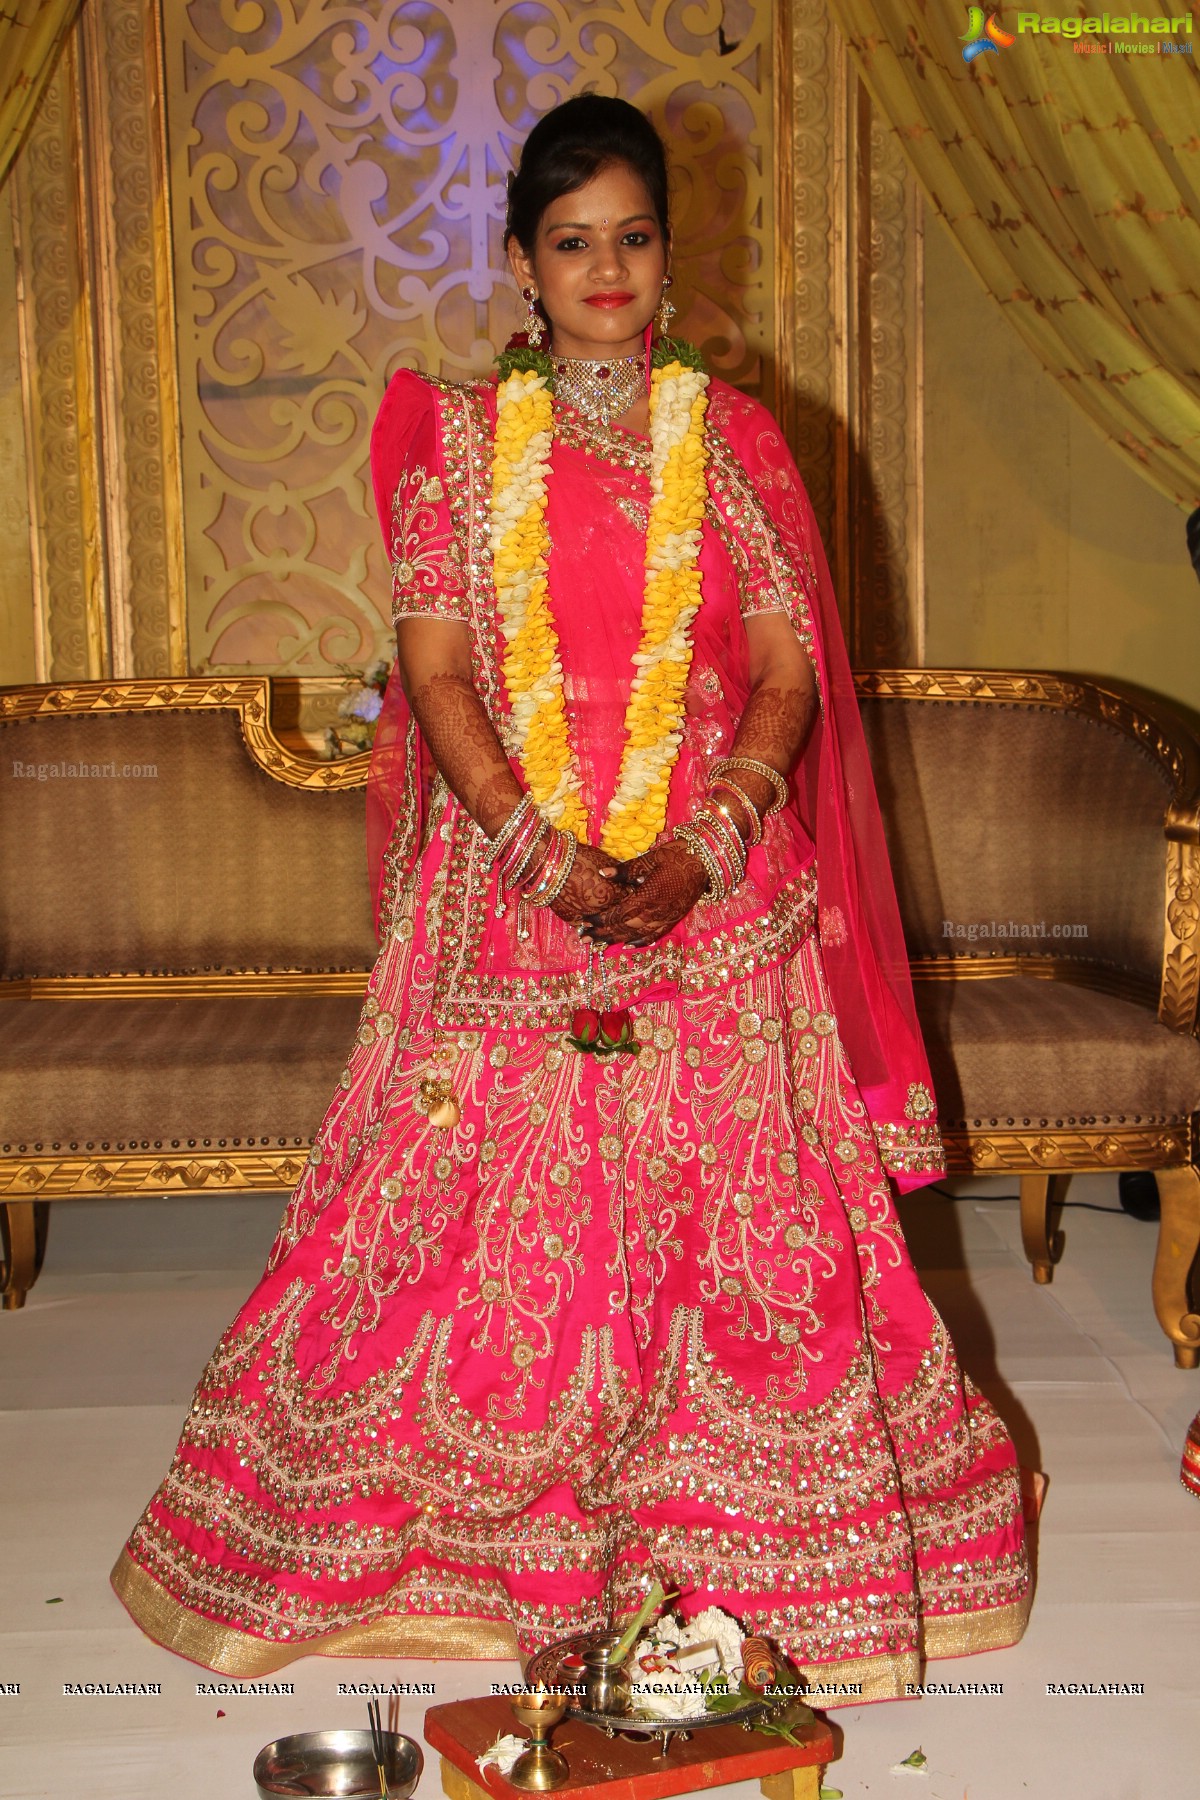 Sri Gopal Toshniwal Engagement Ceremony at SS Convention, Hyderabad